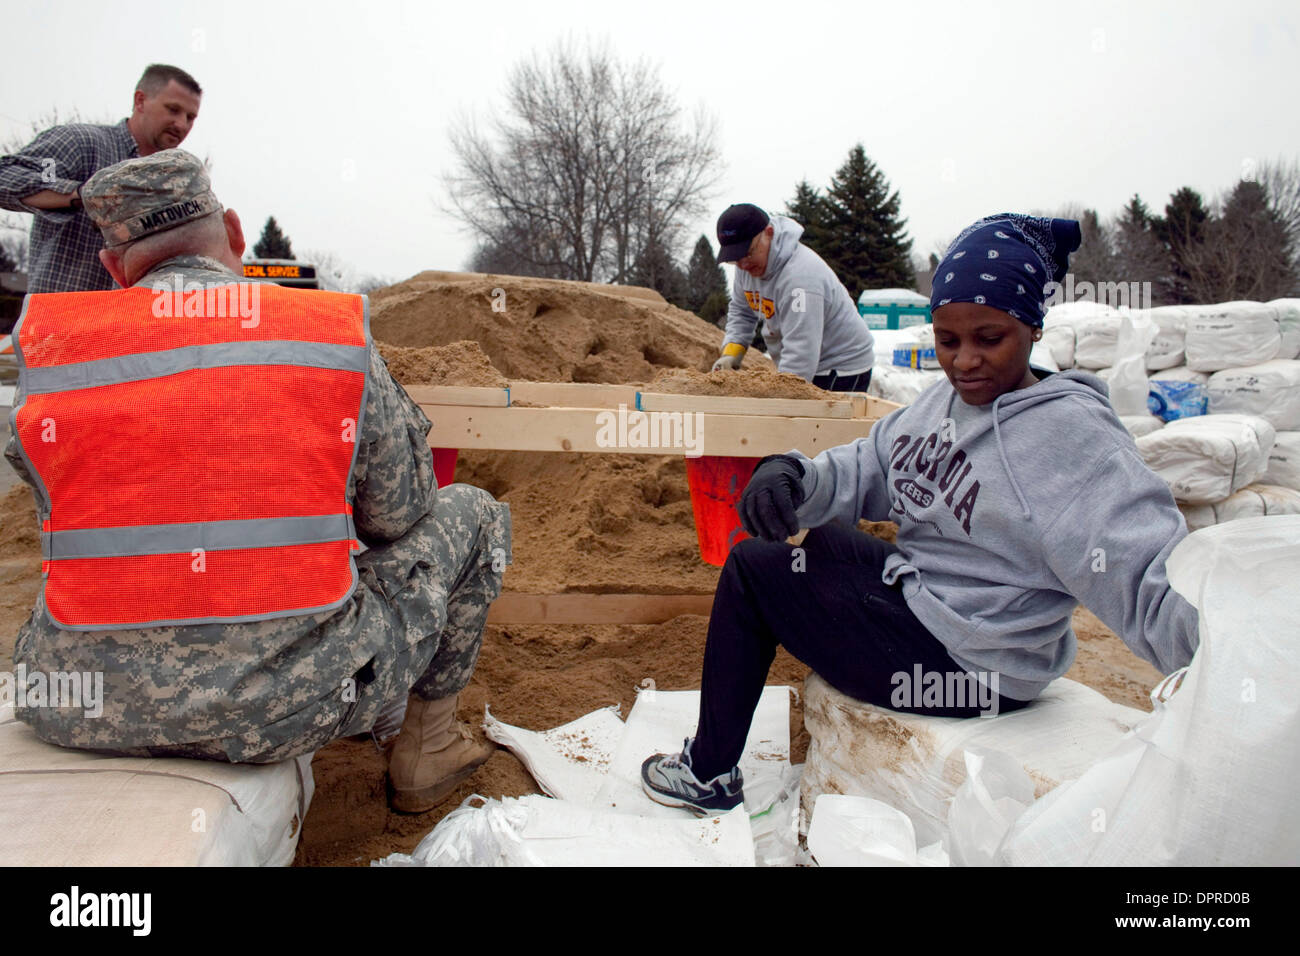 March 22, 2009 - Moorhead, Minnesota, USA - Concordia College student NAI MUNGAYEH, right, fills sandbags with other volunteers and Minnesota Army National Guard troops in a neighborhood along the Red River in Moorhead, Minn. The Red River along the North Dakota and Minnesota border is expected to crest at or near record levels in the coming week. Residents on both sides of the riv Stock Photo